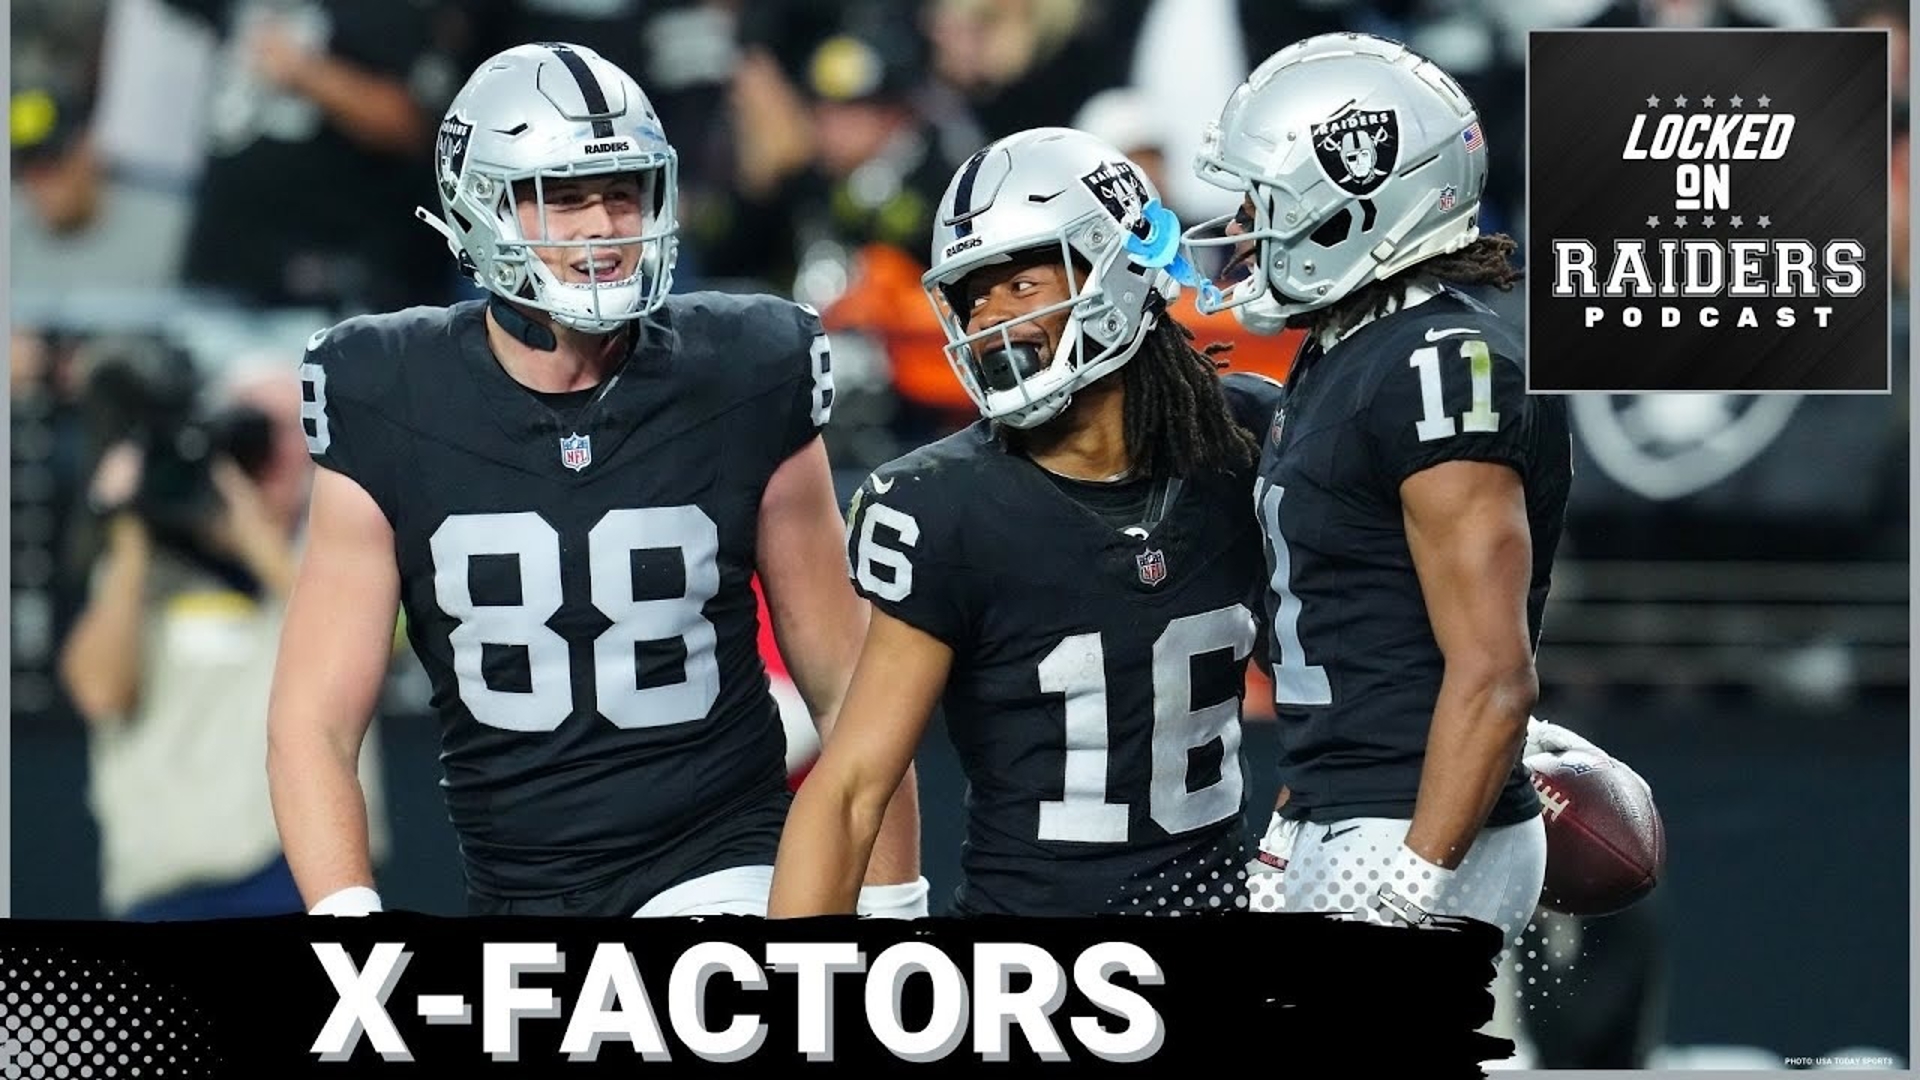 We will wrap up our Raiders strengths, weaknesses and X- Factor conversation.